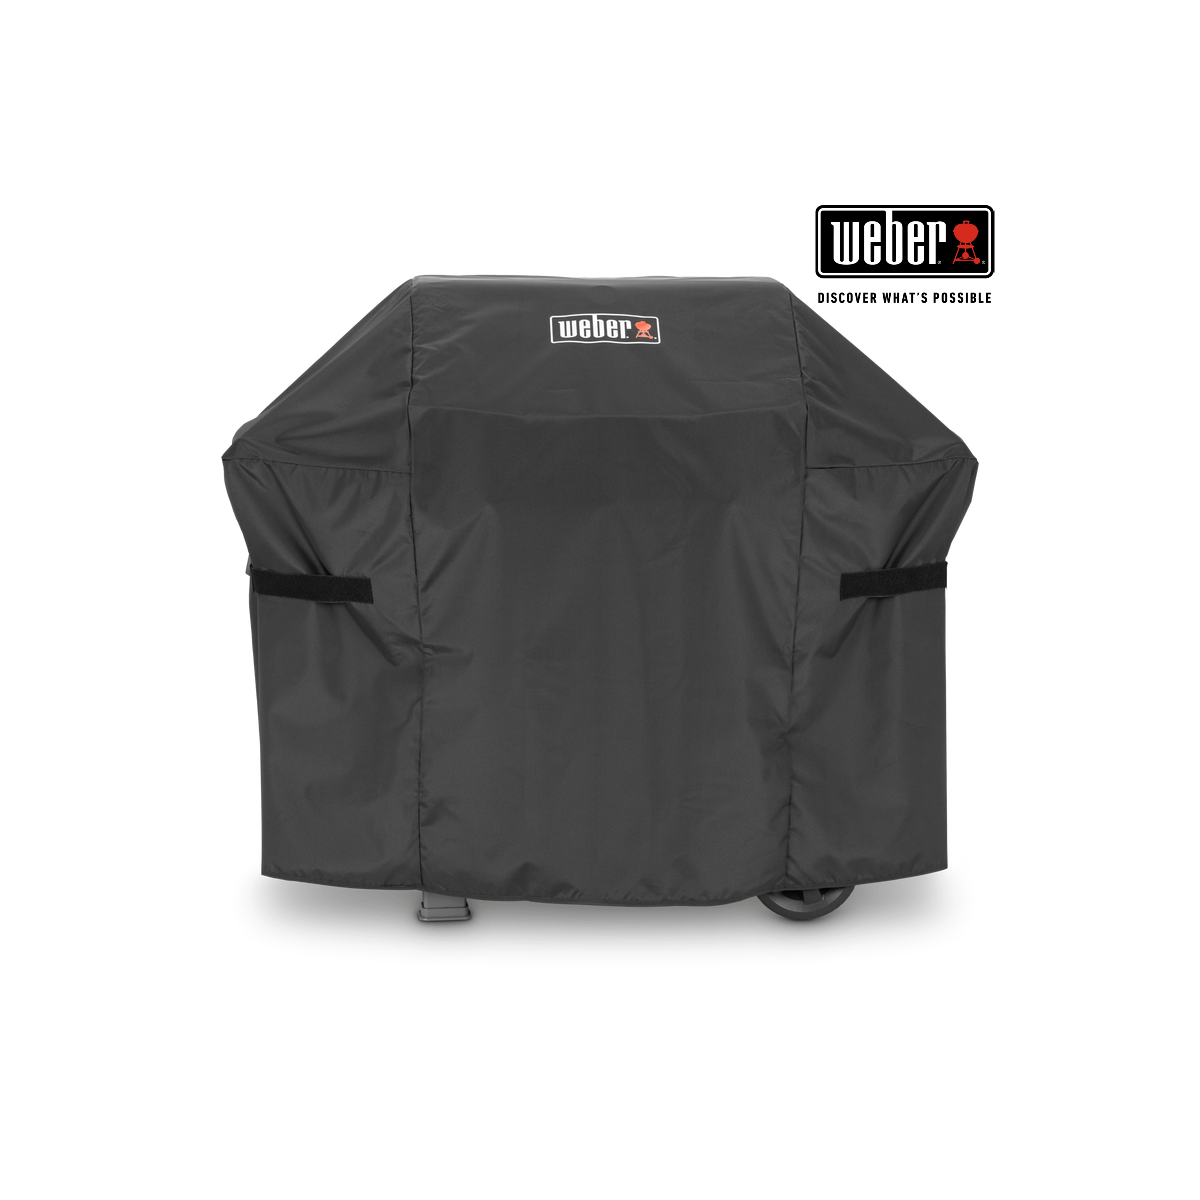 WEBER GRILL COVER PREMIUM Spirit II 200 - Fits Spirit II 200 & and Spirit E-210 (excl. EO-210), 7182